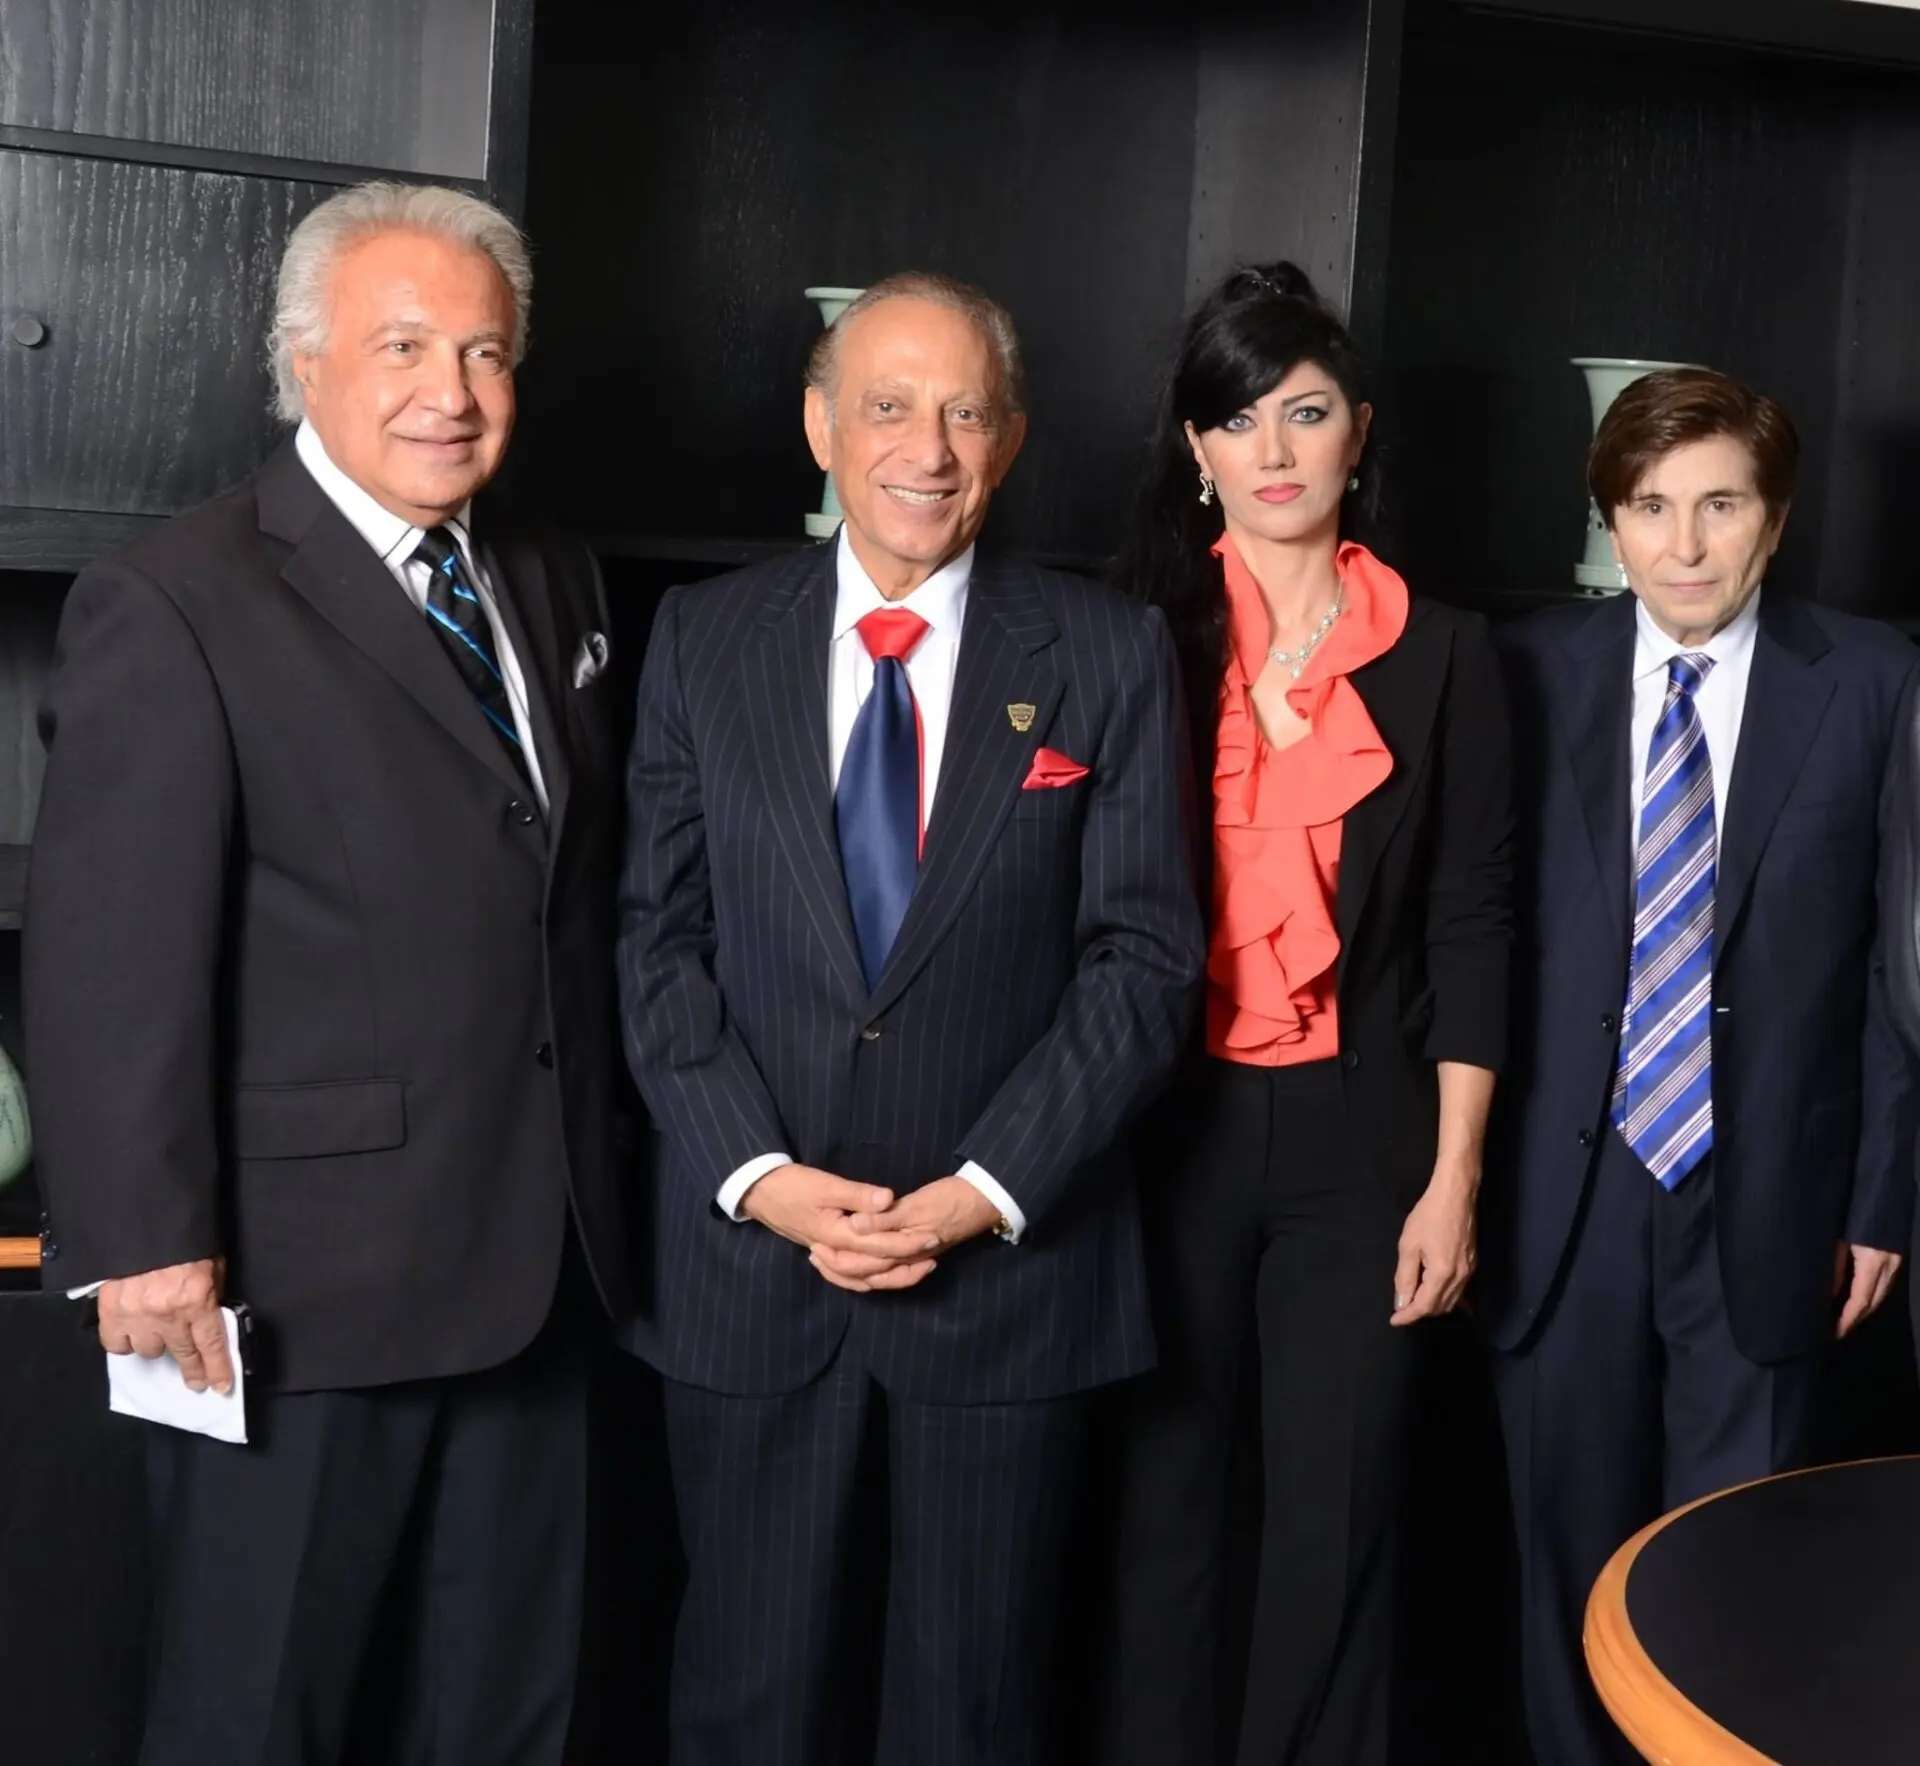 A group of people in suits and ties standing next to each other.